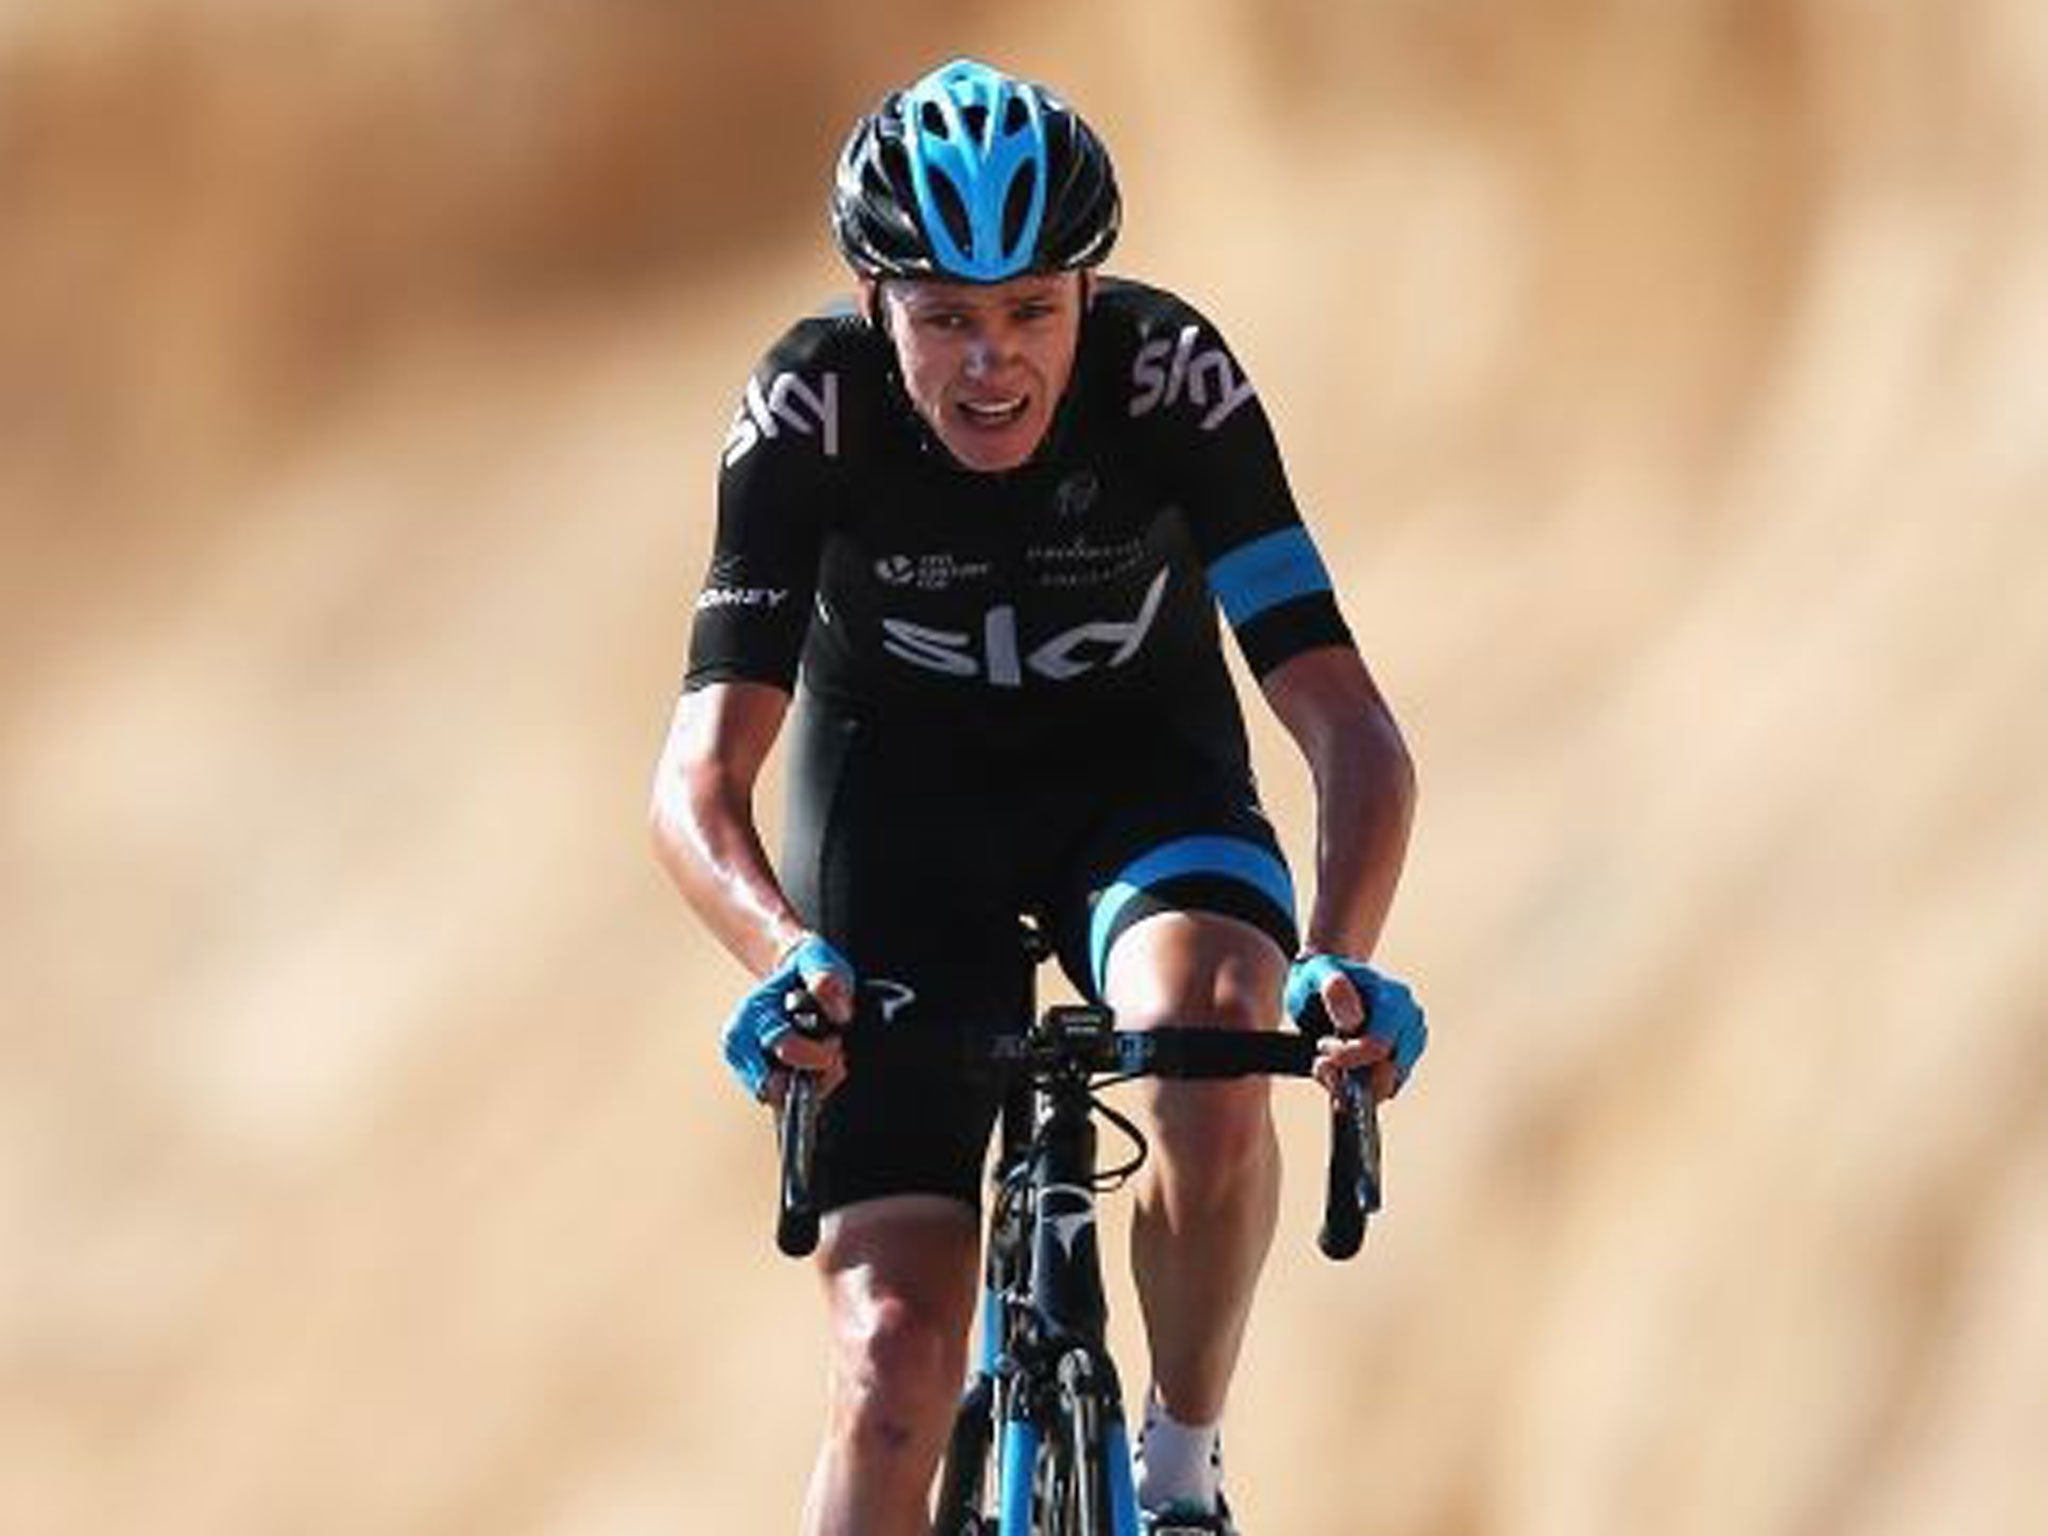 Home alone: Team Sky’s Chris Froome approaches the finish to win stage five of the Tour of Oman yesterday. The tour concludes today in Muscat